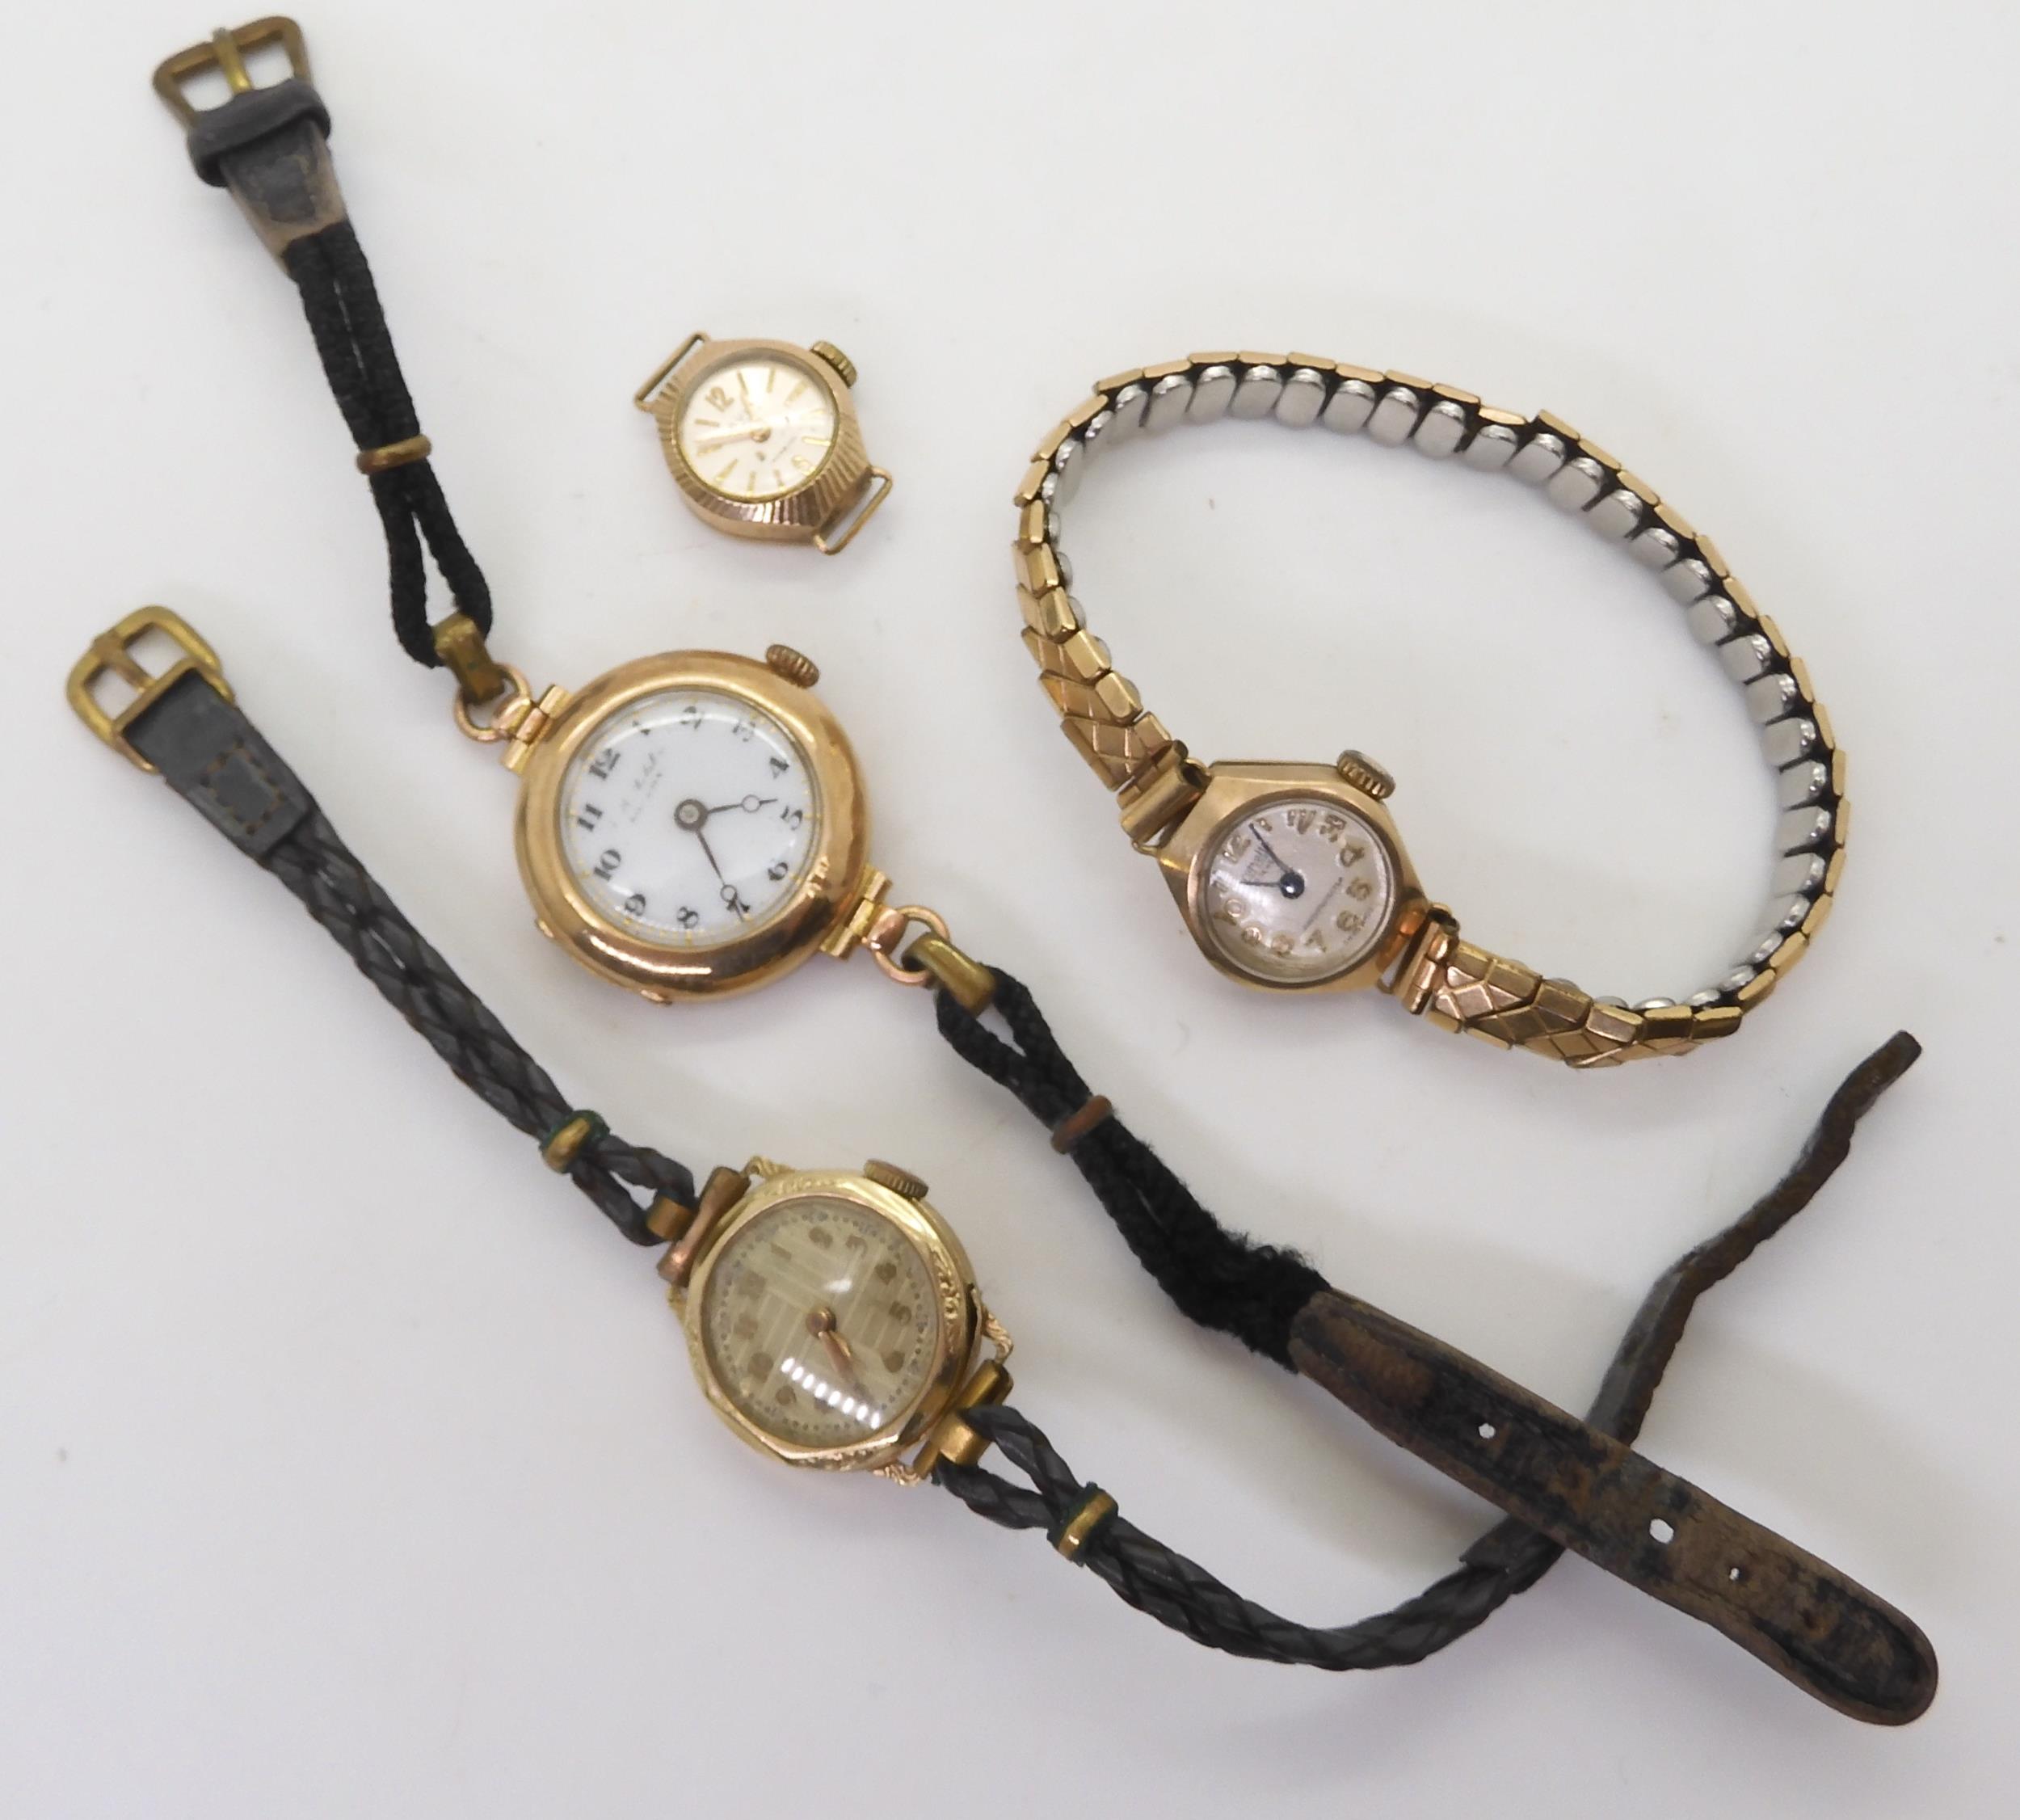 A 14k gold cased ladies watch with leather strap, weight together including mechanism 14gms, and